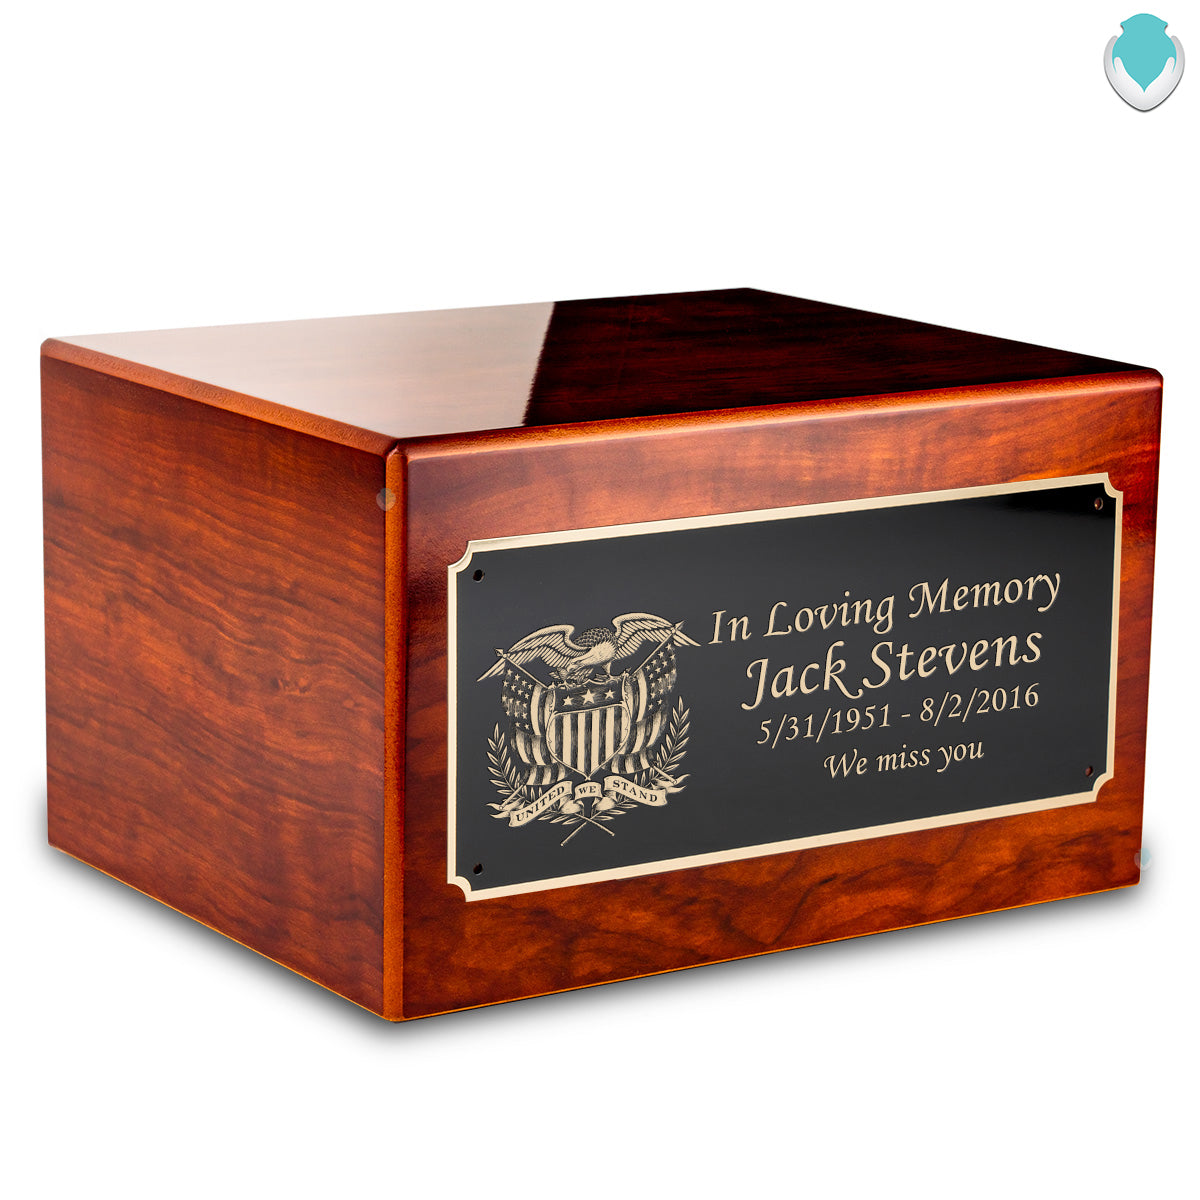 Custom Engraved Heritage Rosewood Adult Cremation Urn Memorial Box for Ashes